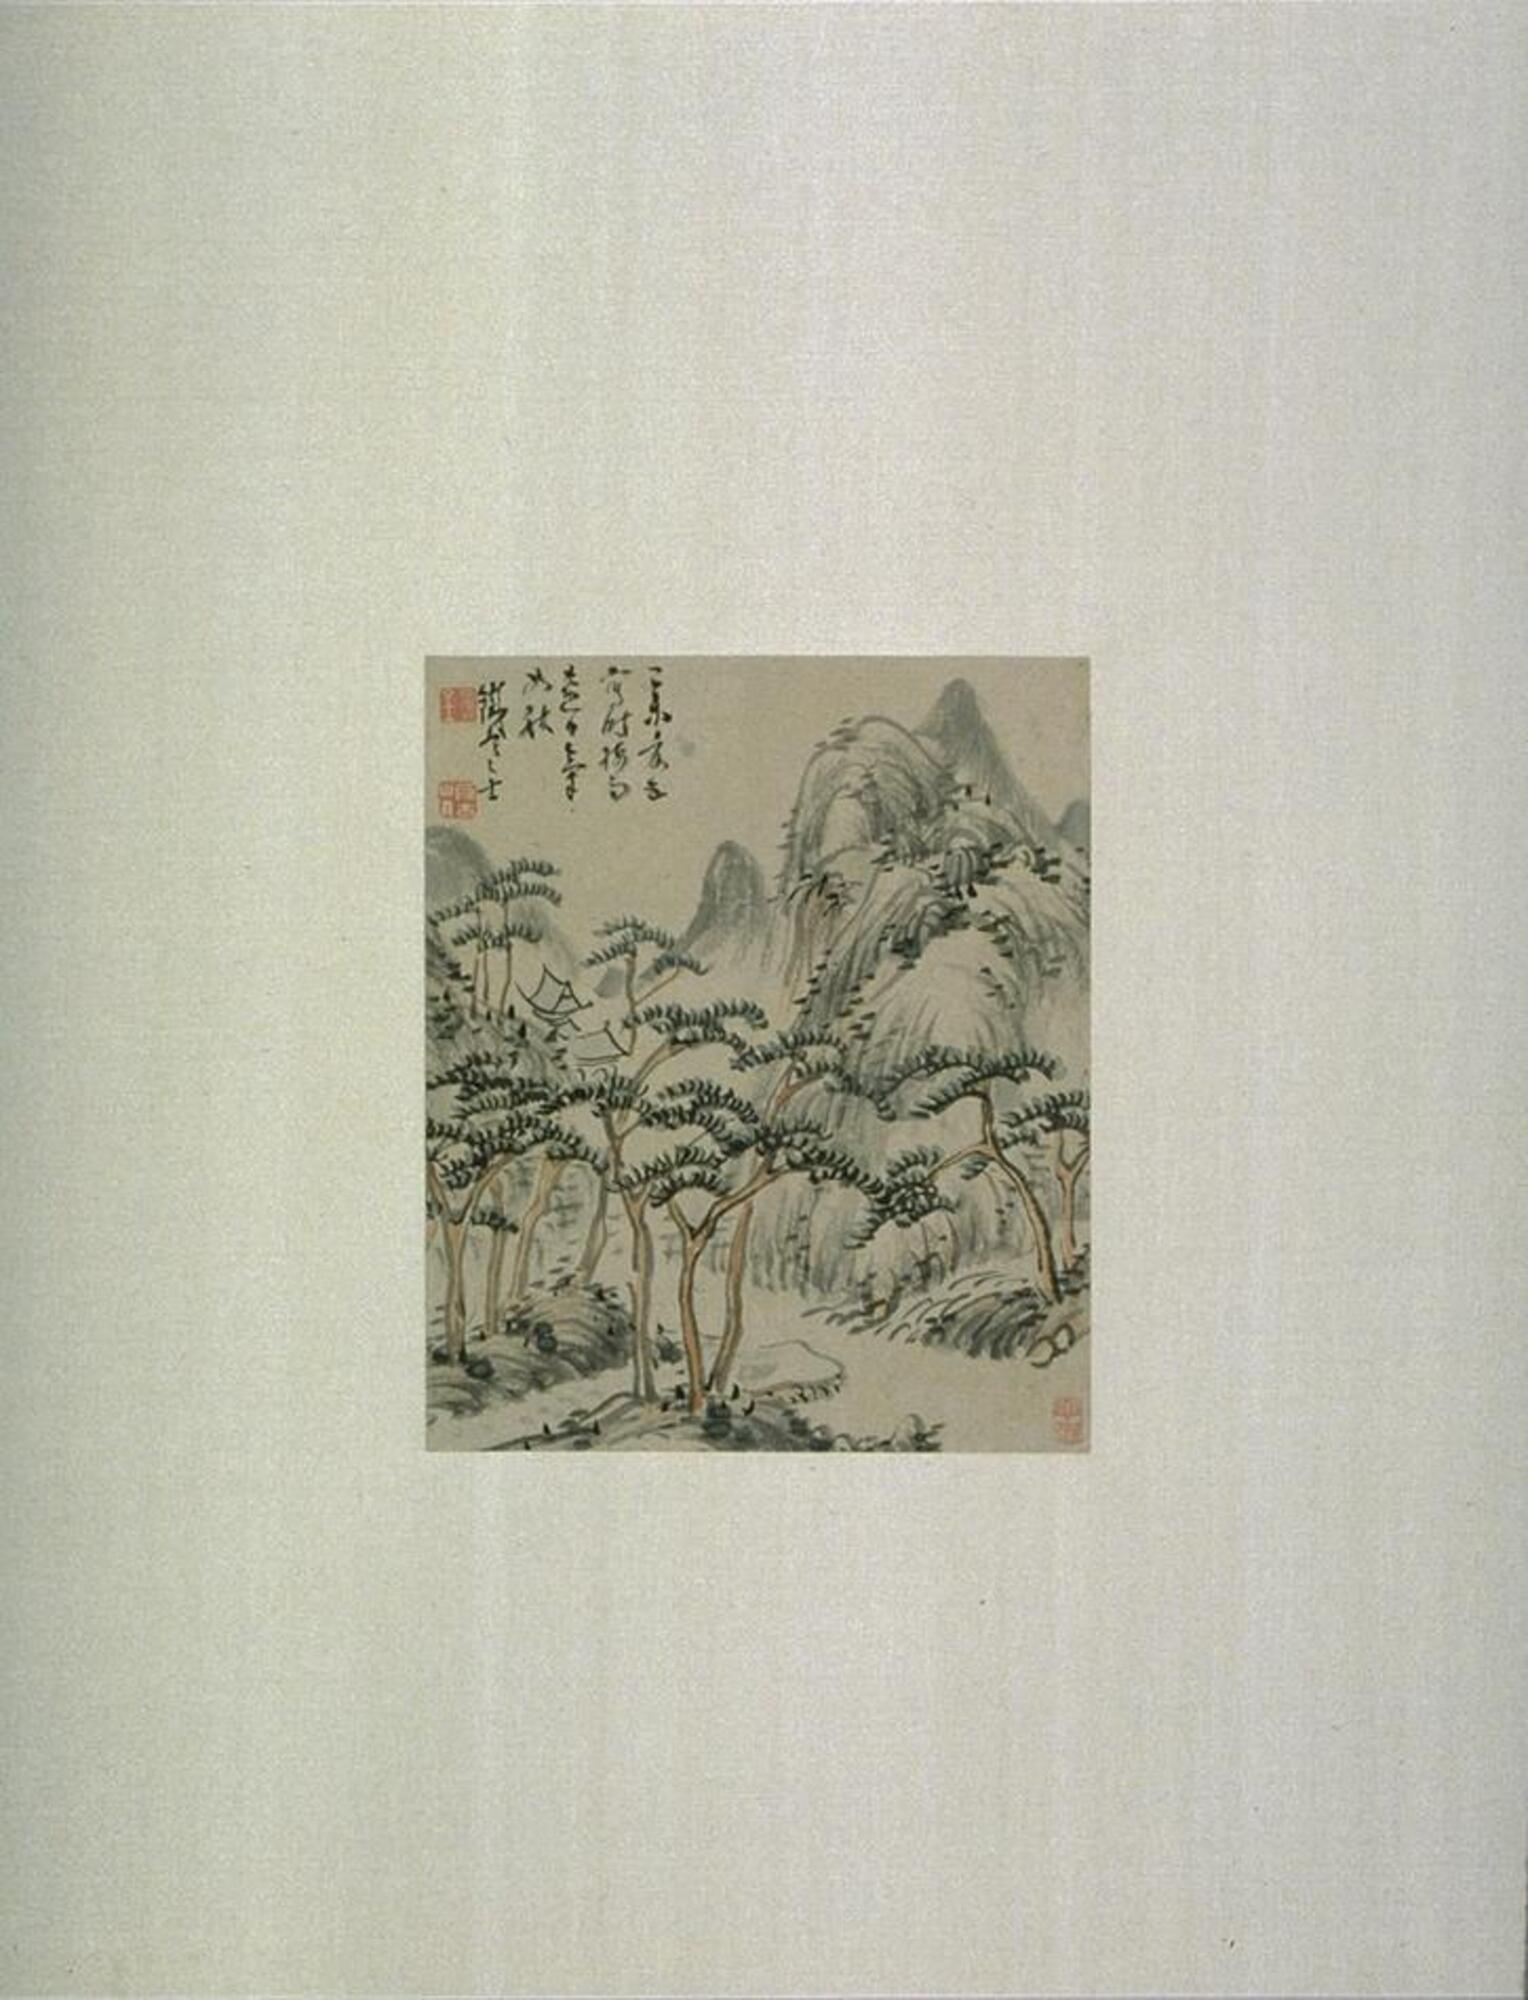 There are mountains in the background with a temple in front partially hidden behind trees and a road leading to it. The artist uses color, a green coloring for the foliage and brown for the tree trunks. In the top left corner, there is an inscription by the artist and a signature.